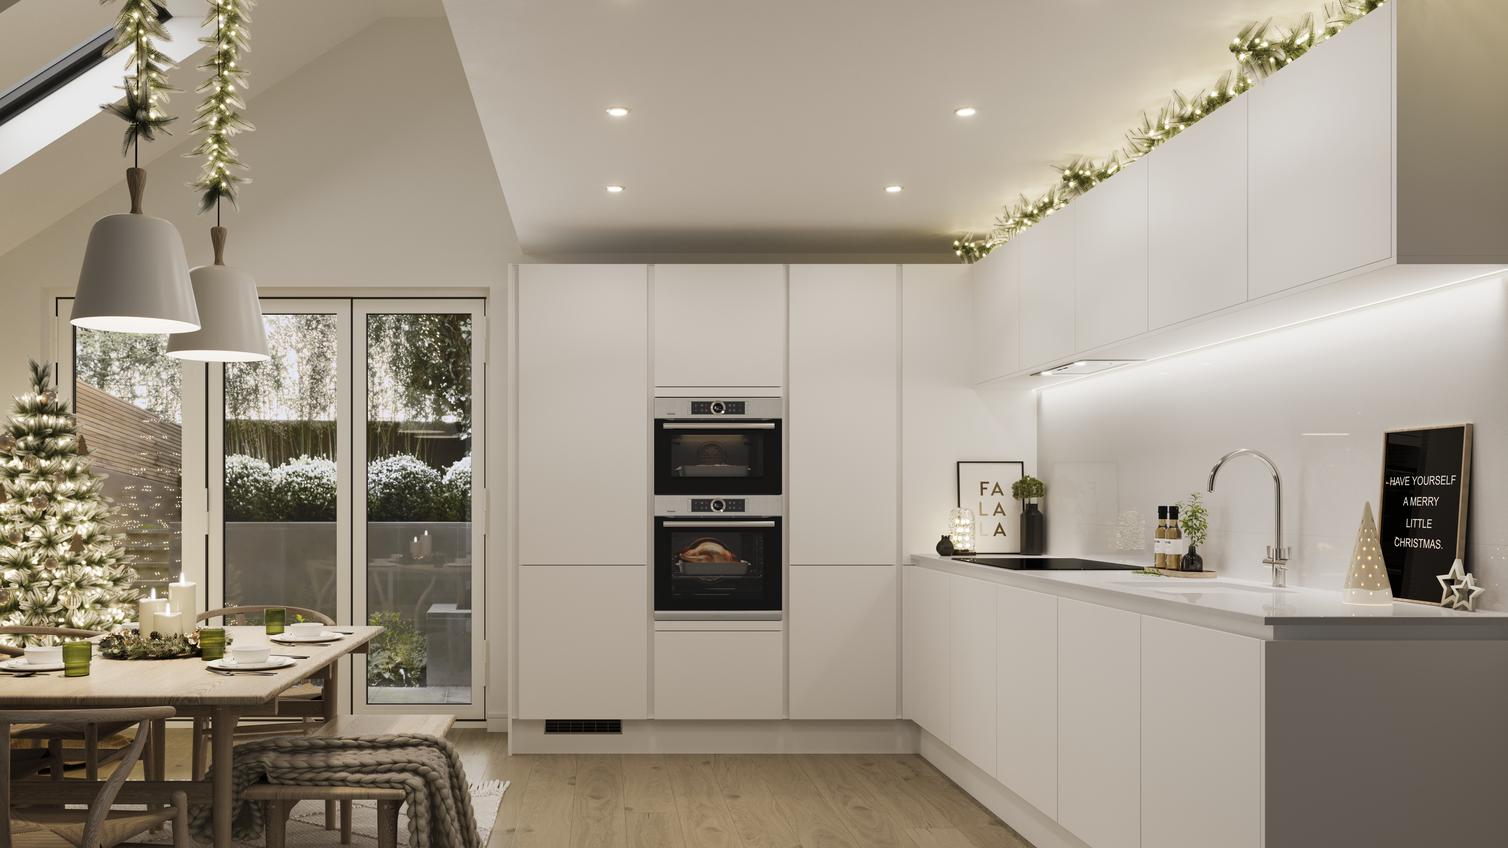 a white kitchen at christmas with a tree, fairy lights and garlands.